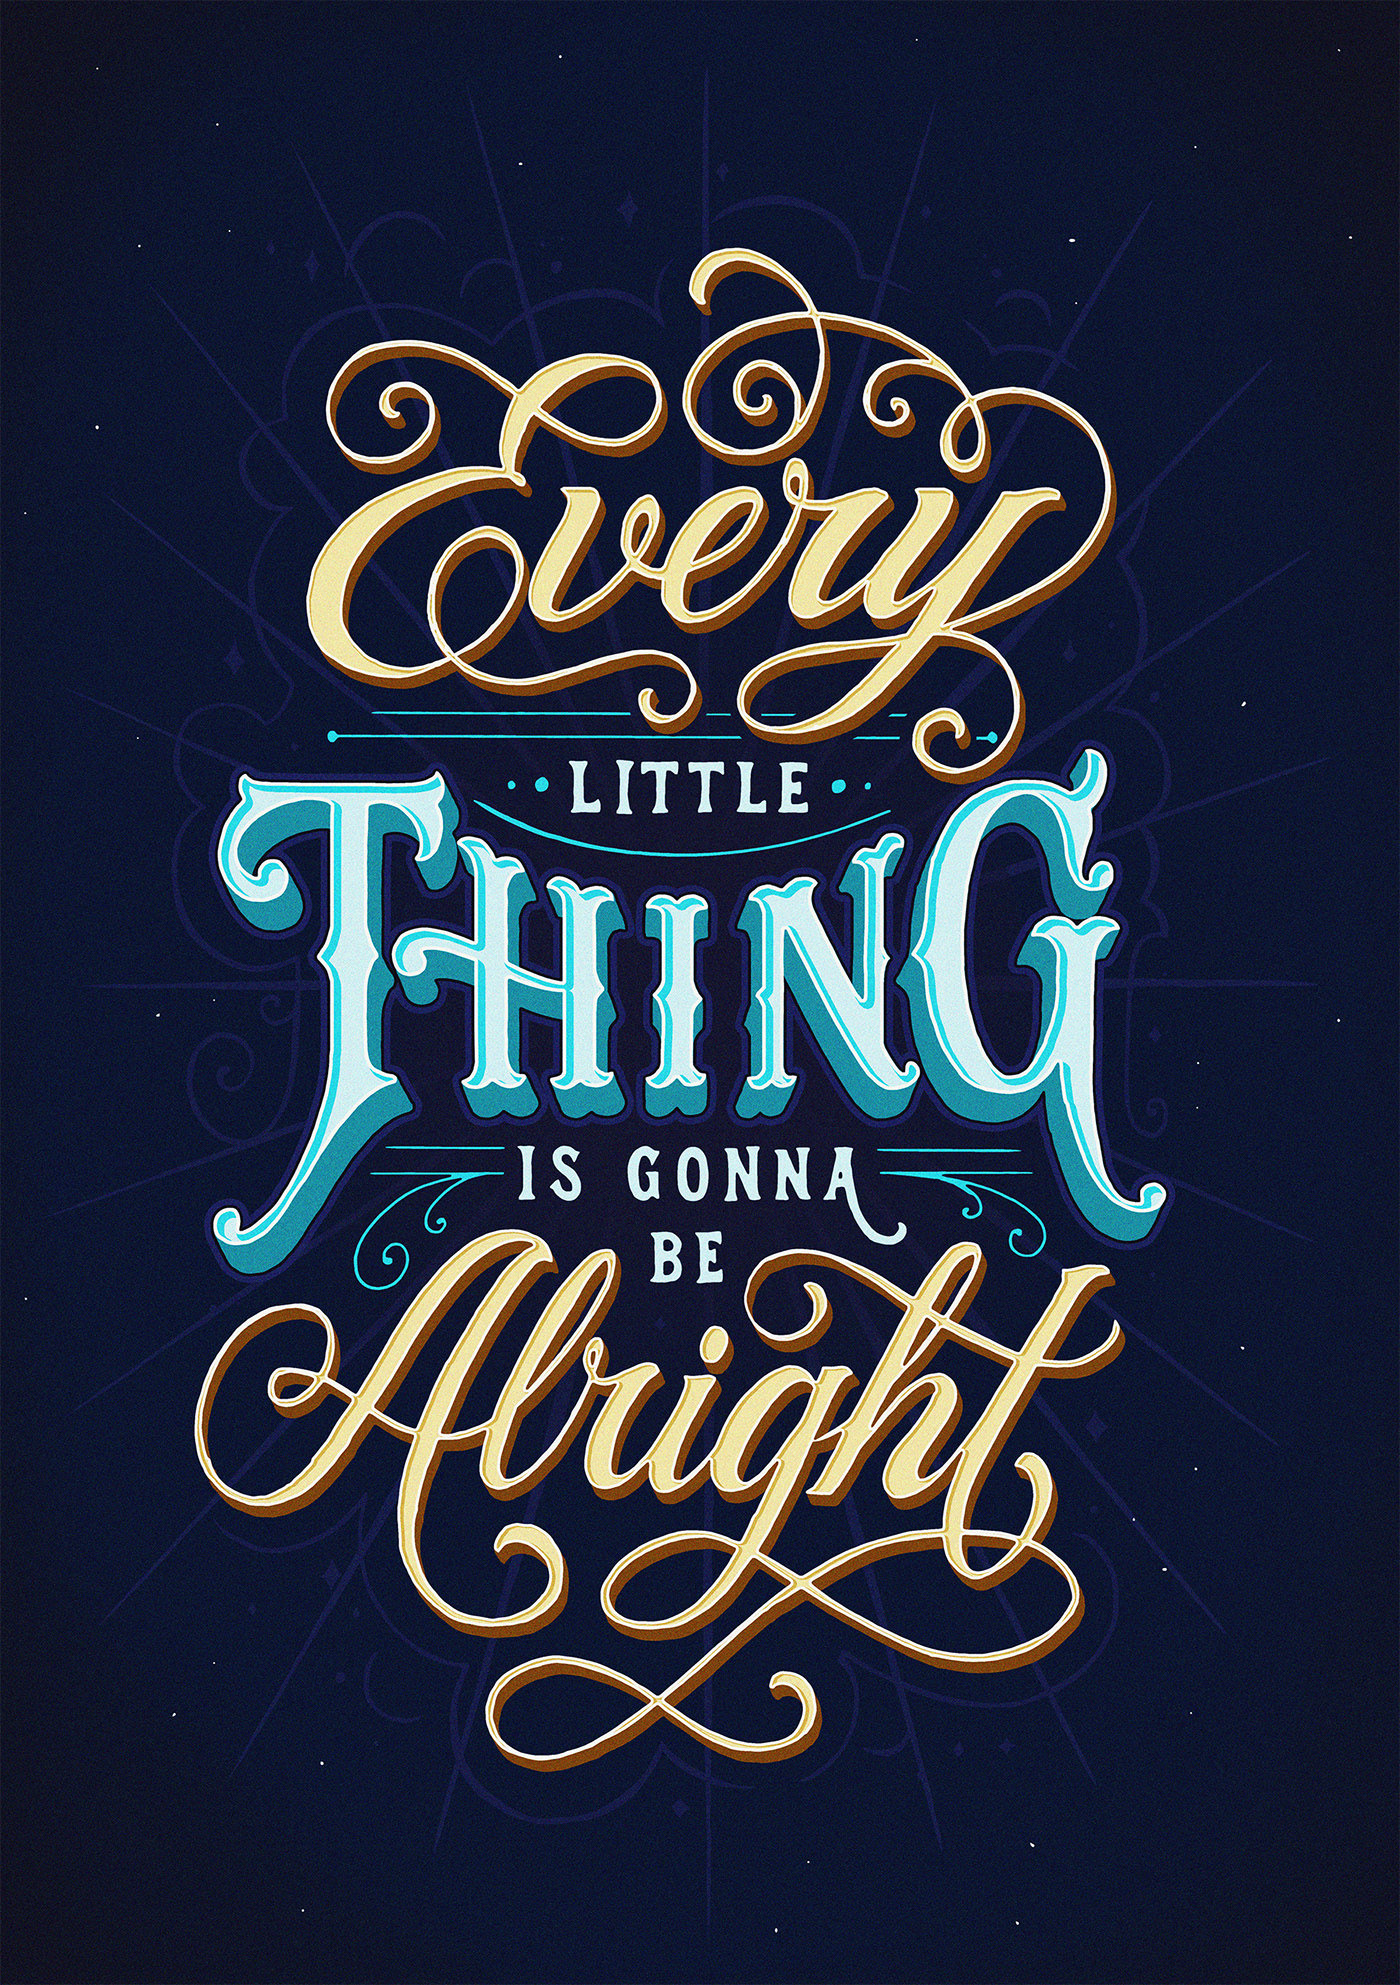 Hand Lettering Works by Tobias Saul